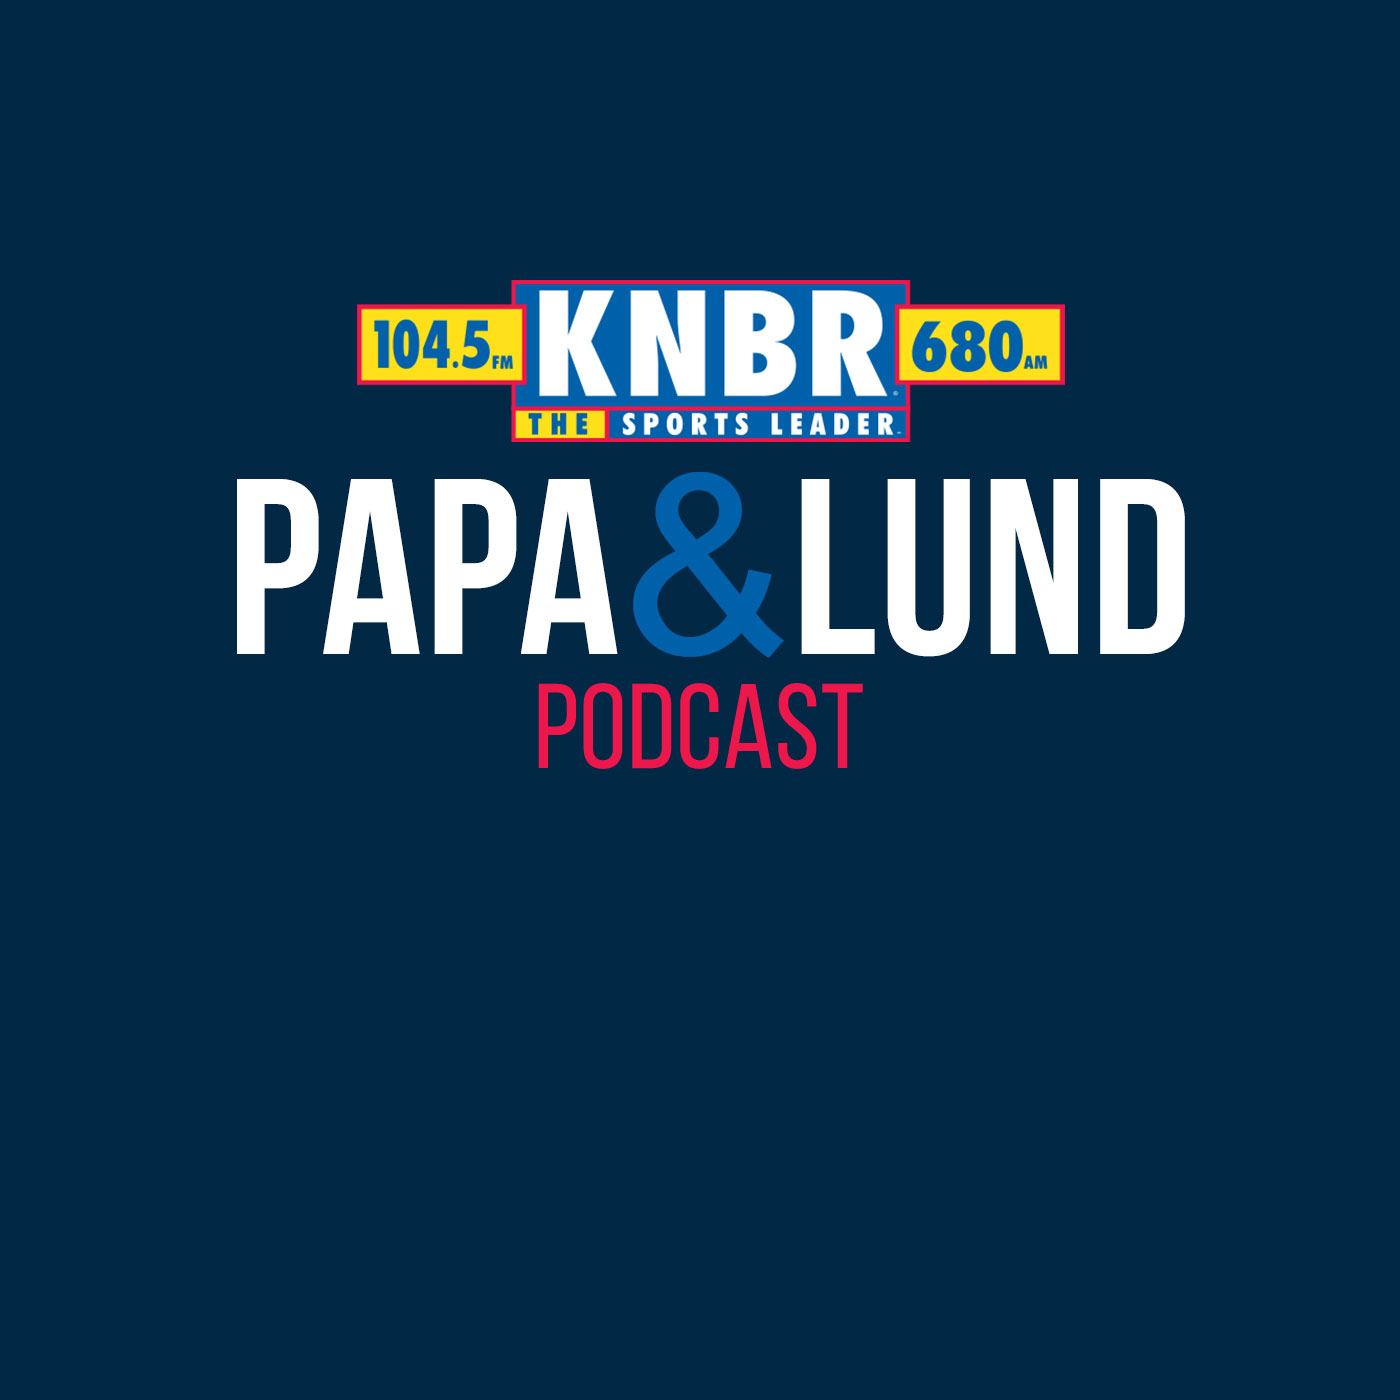 11-9 John Bosa joins Papa & Lund to discuss his sons, Nick & Joey, as their teams face off for the first time in the regular season